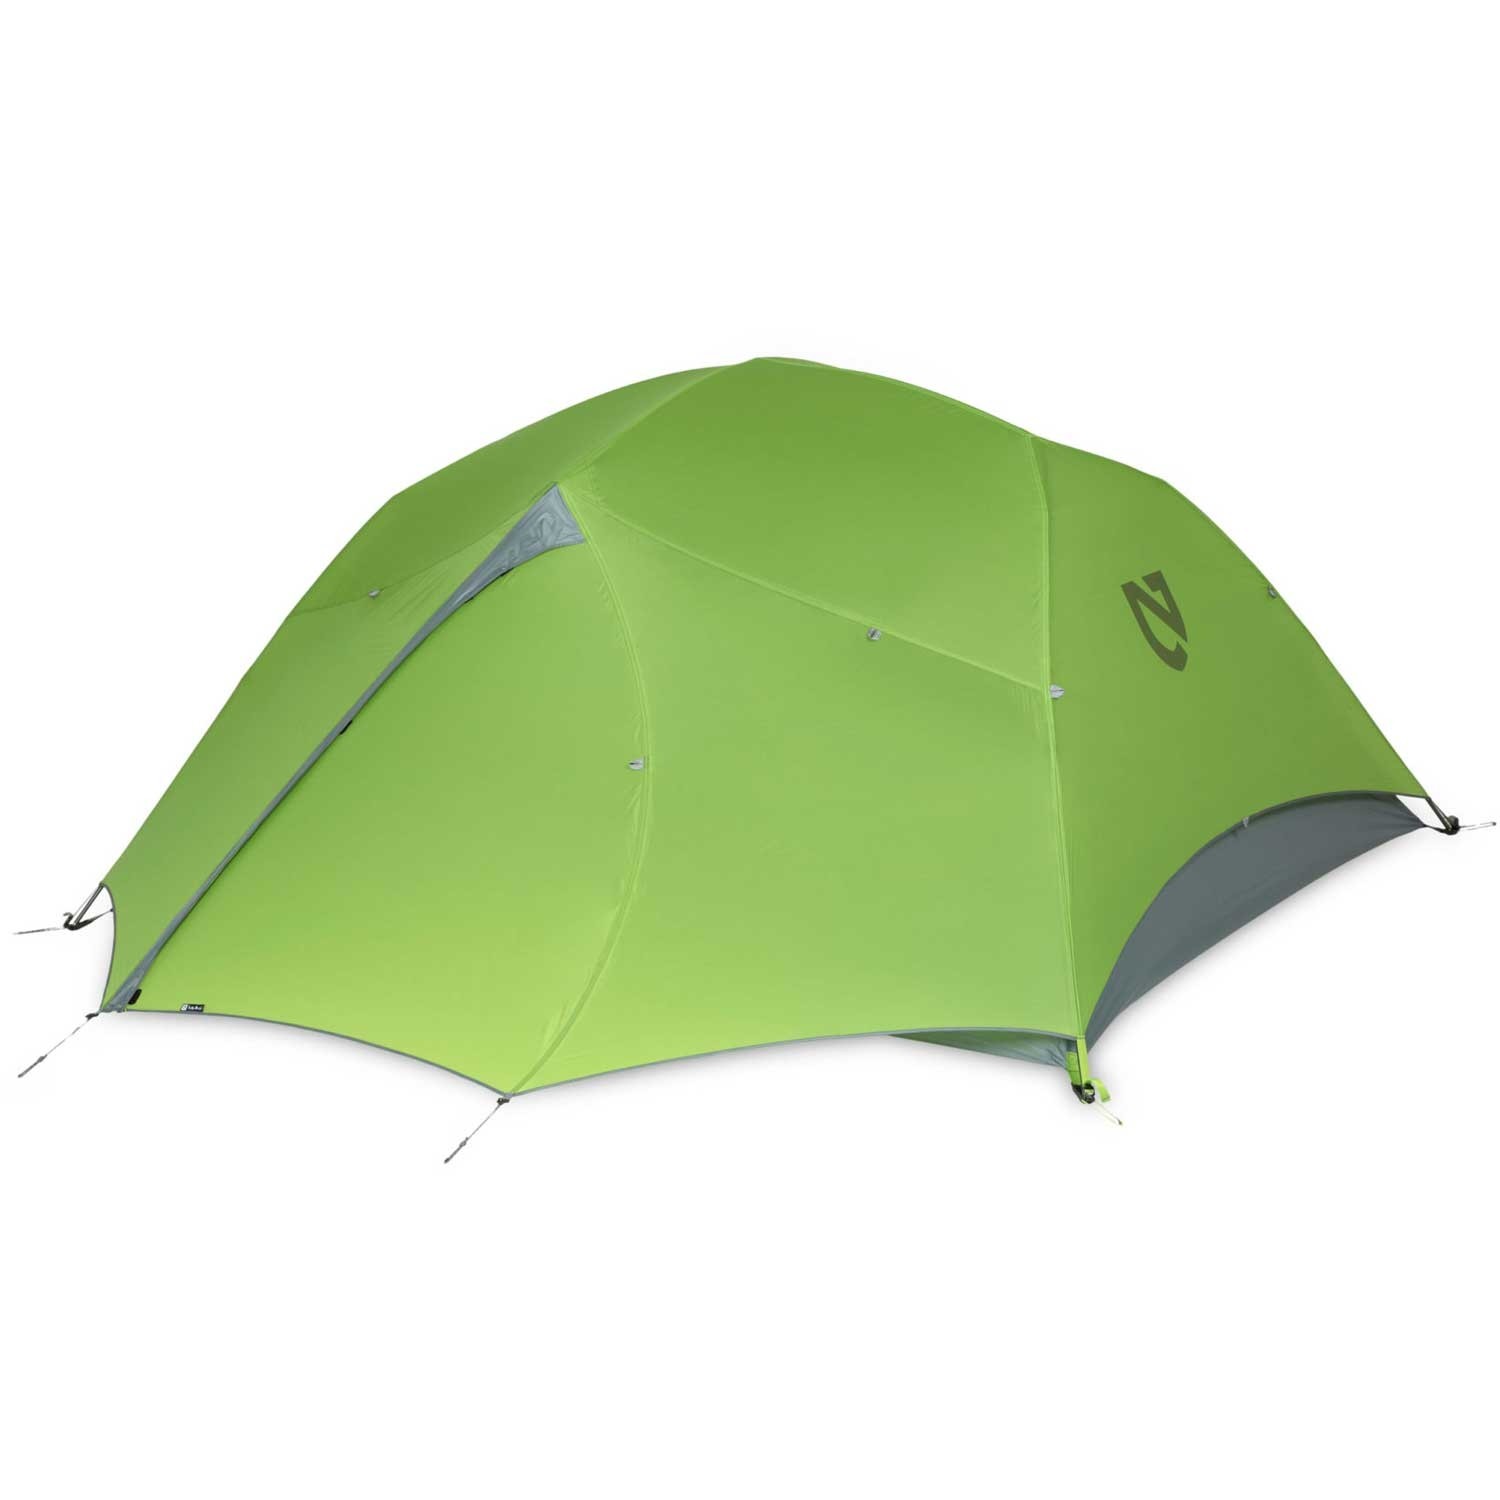 Nemo Dagger™ Backpacking Tent - 3 Person - Birch Leaf Green